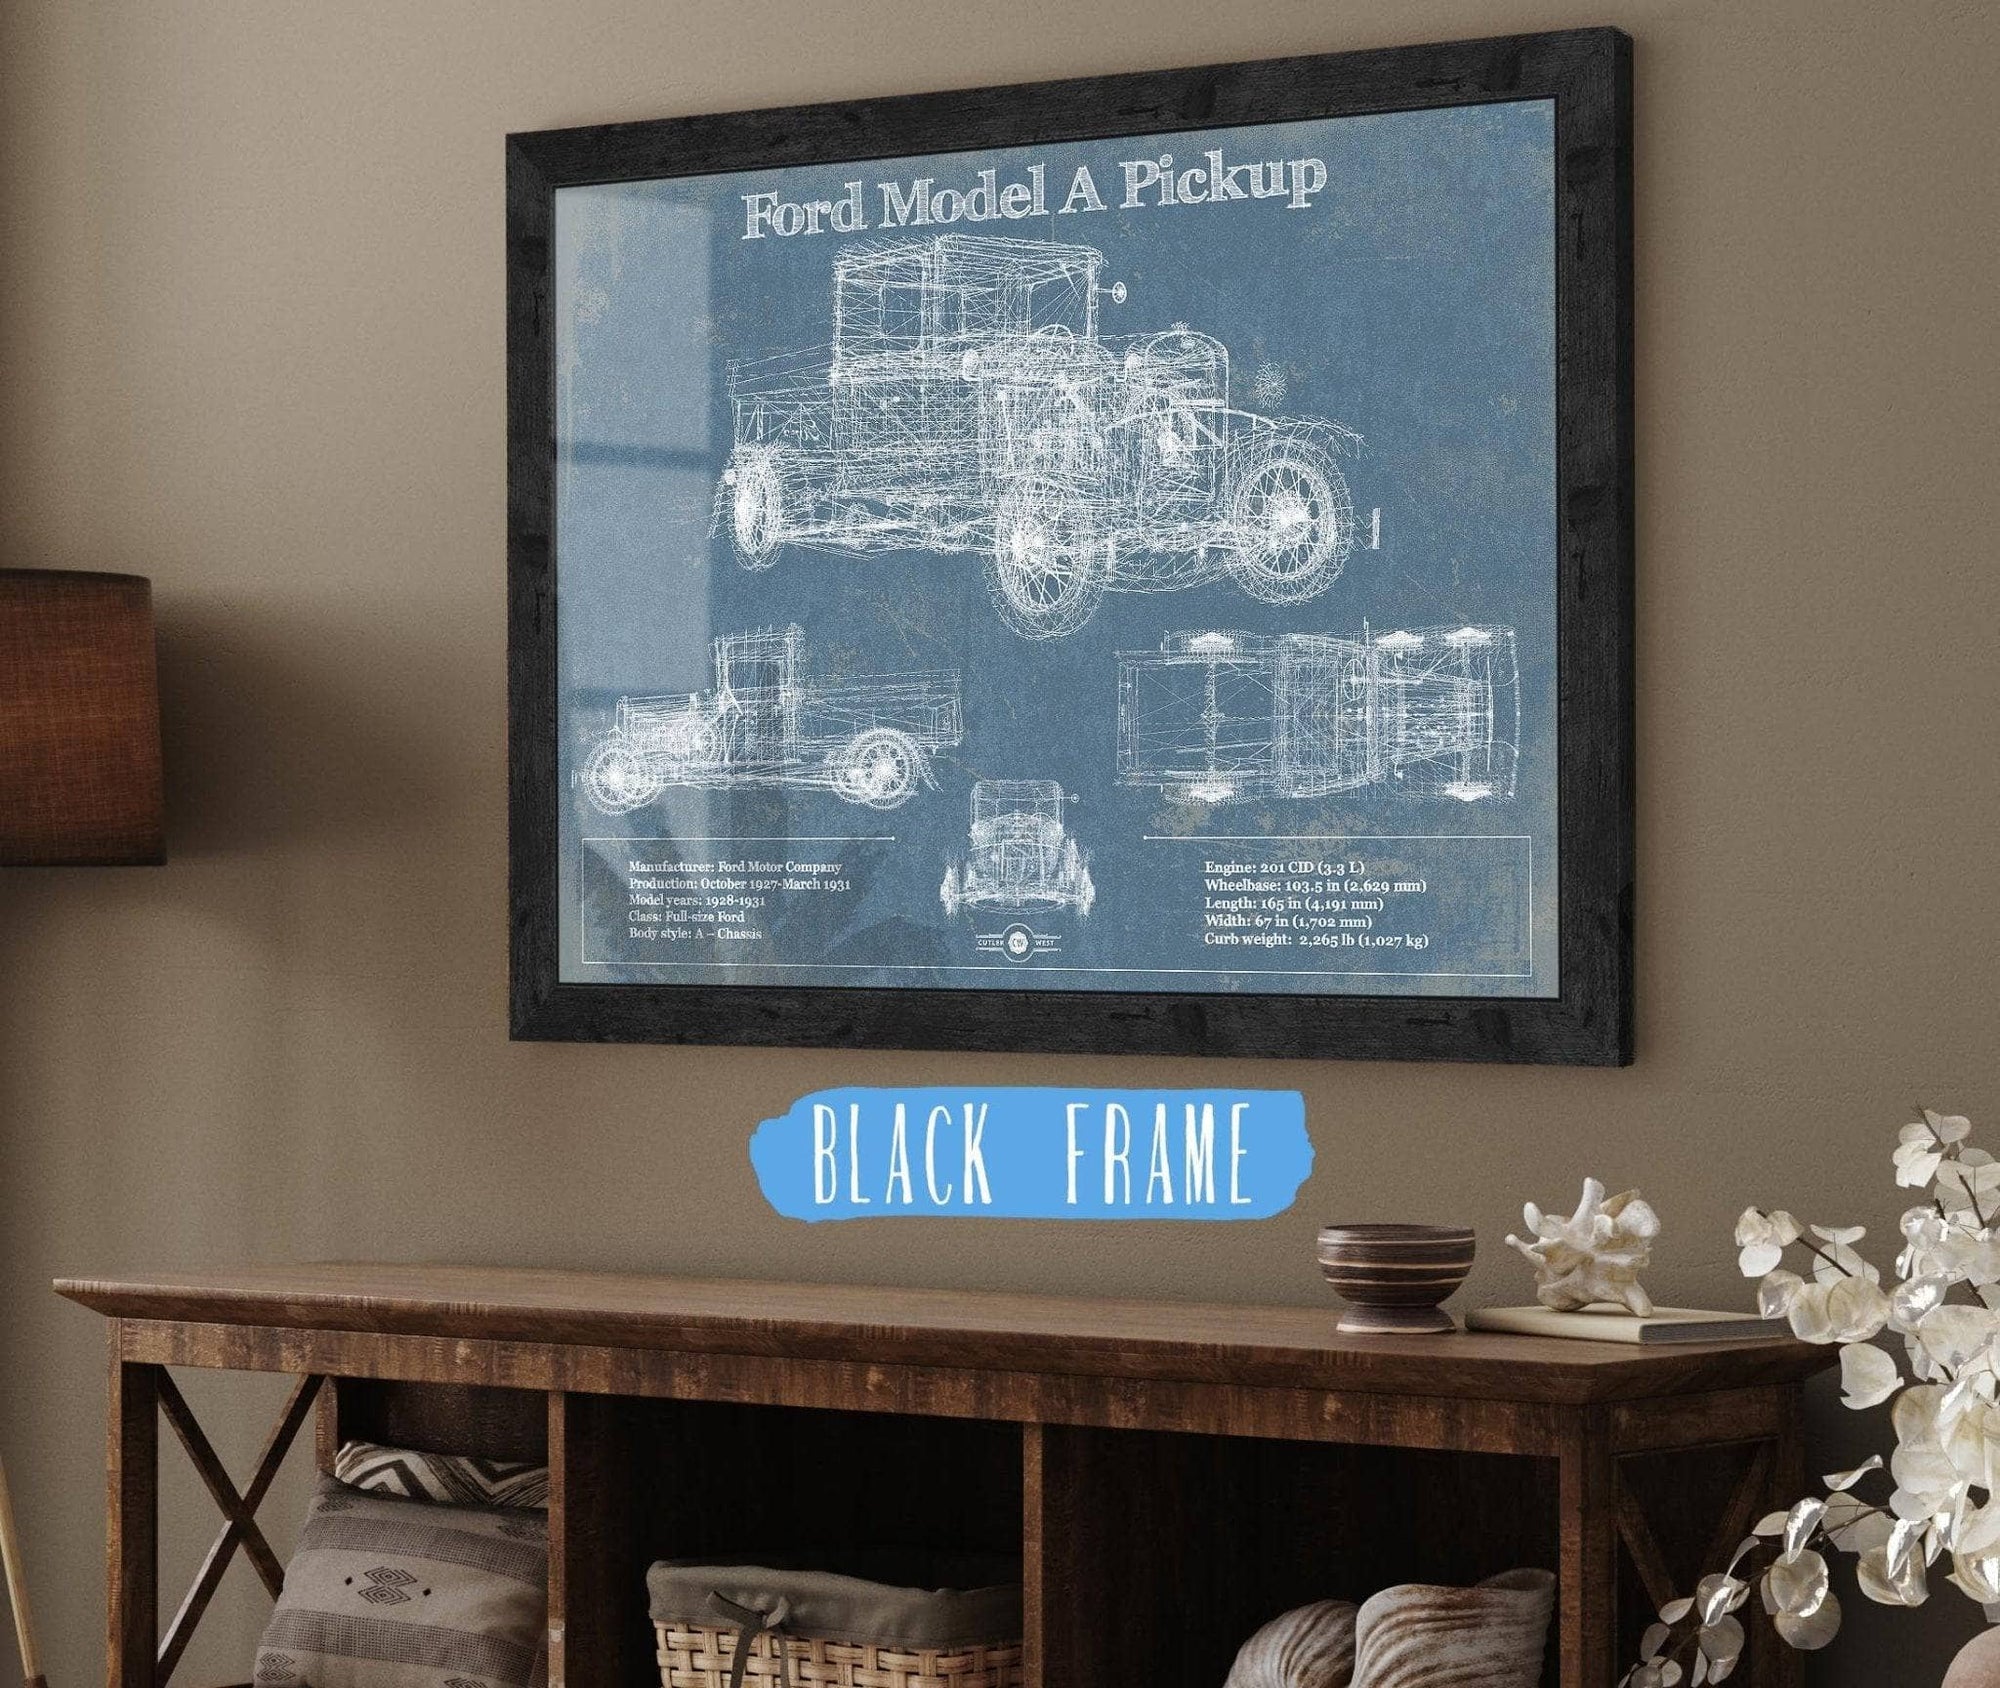 Cutler West Ford Collection 14" x 11" / Black Frame Ford Model A Pickup Vintage Blueprint Auto Print 833110113_54744